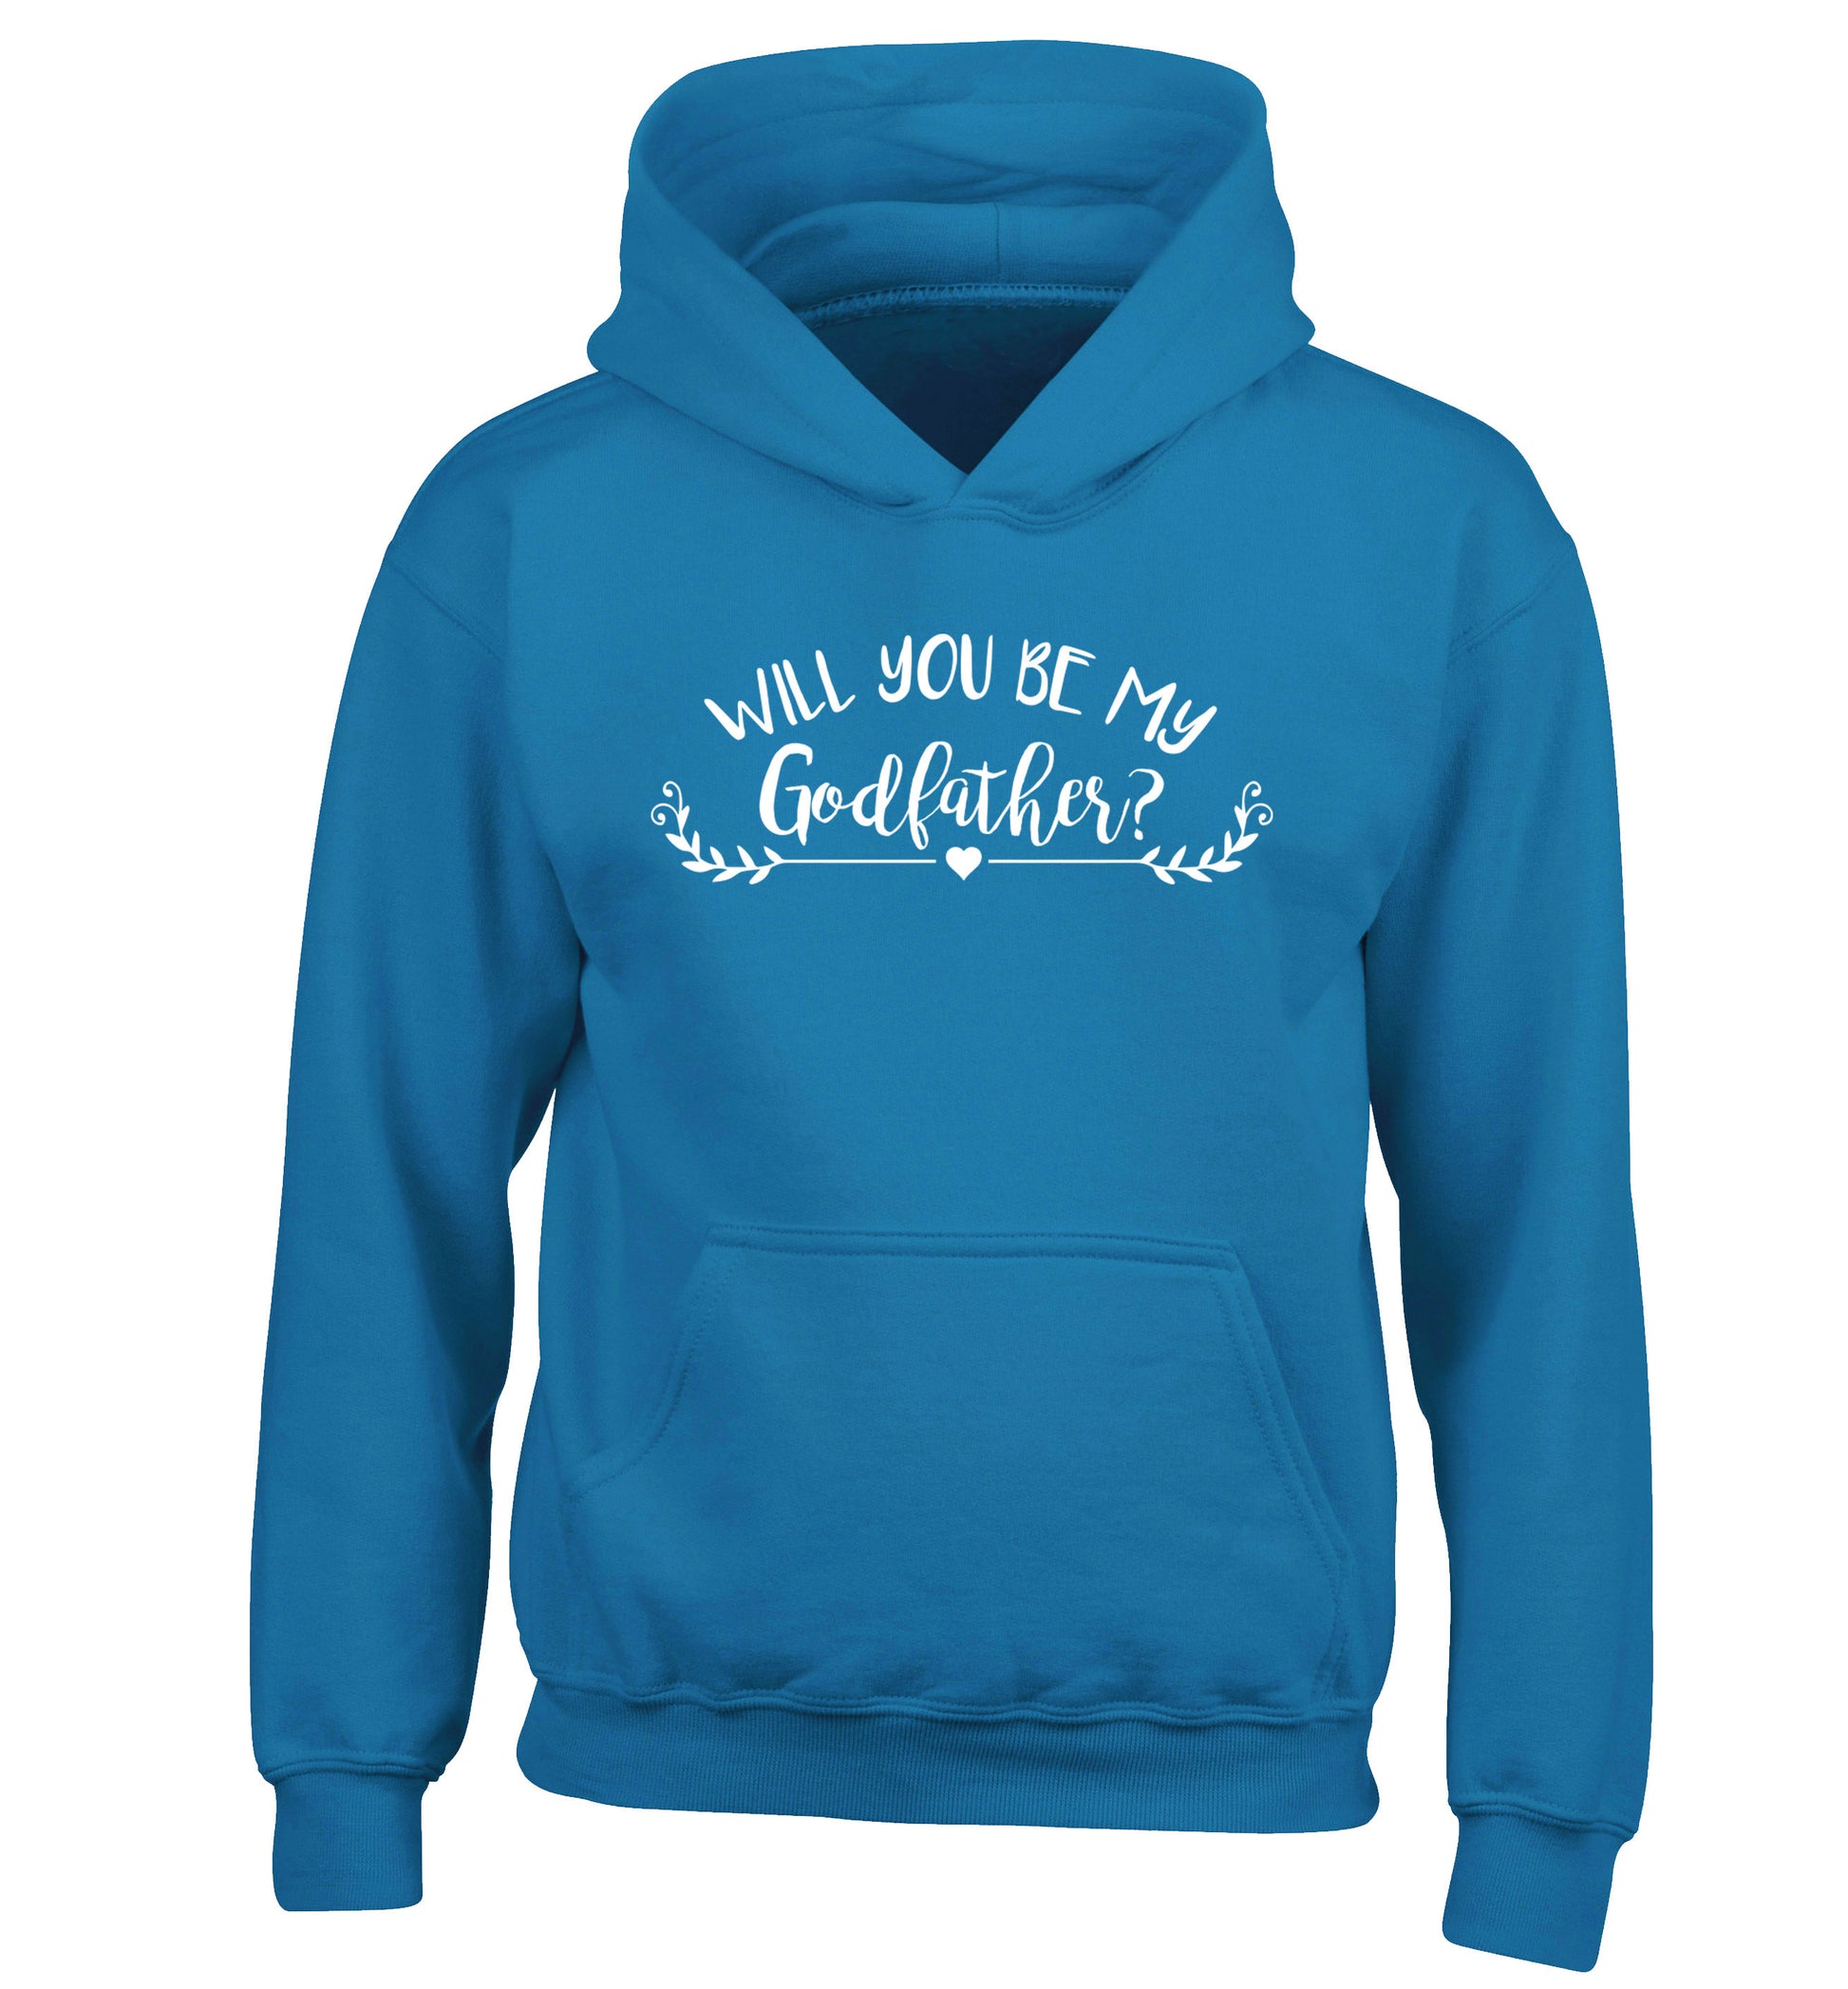 Will you be my godfather? children's blue hoodie 12-14 Years